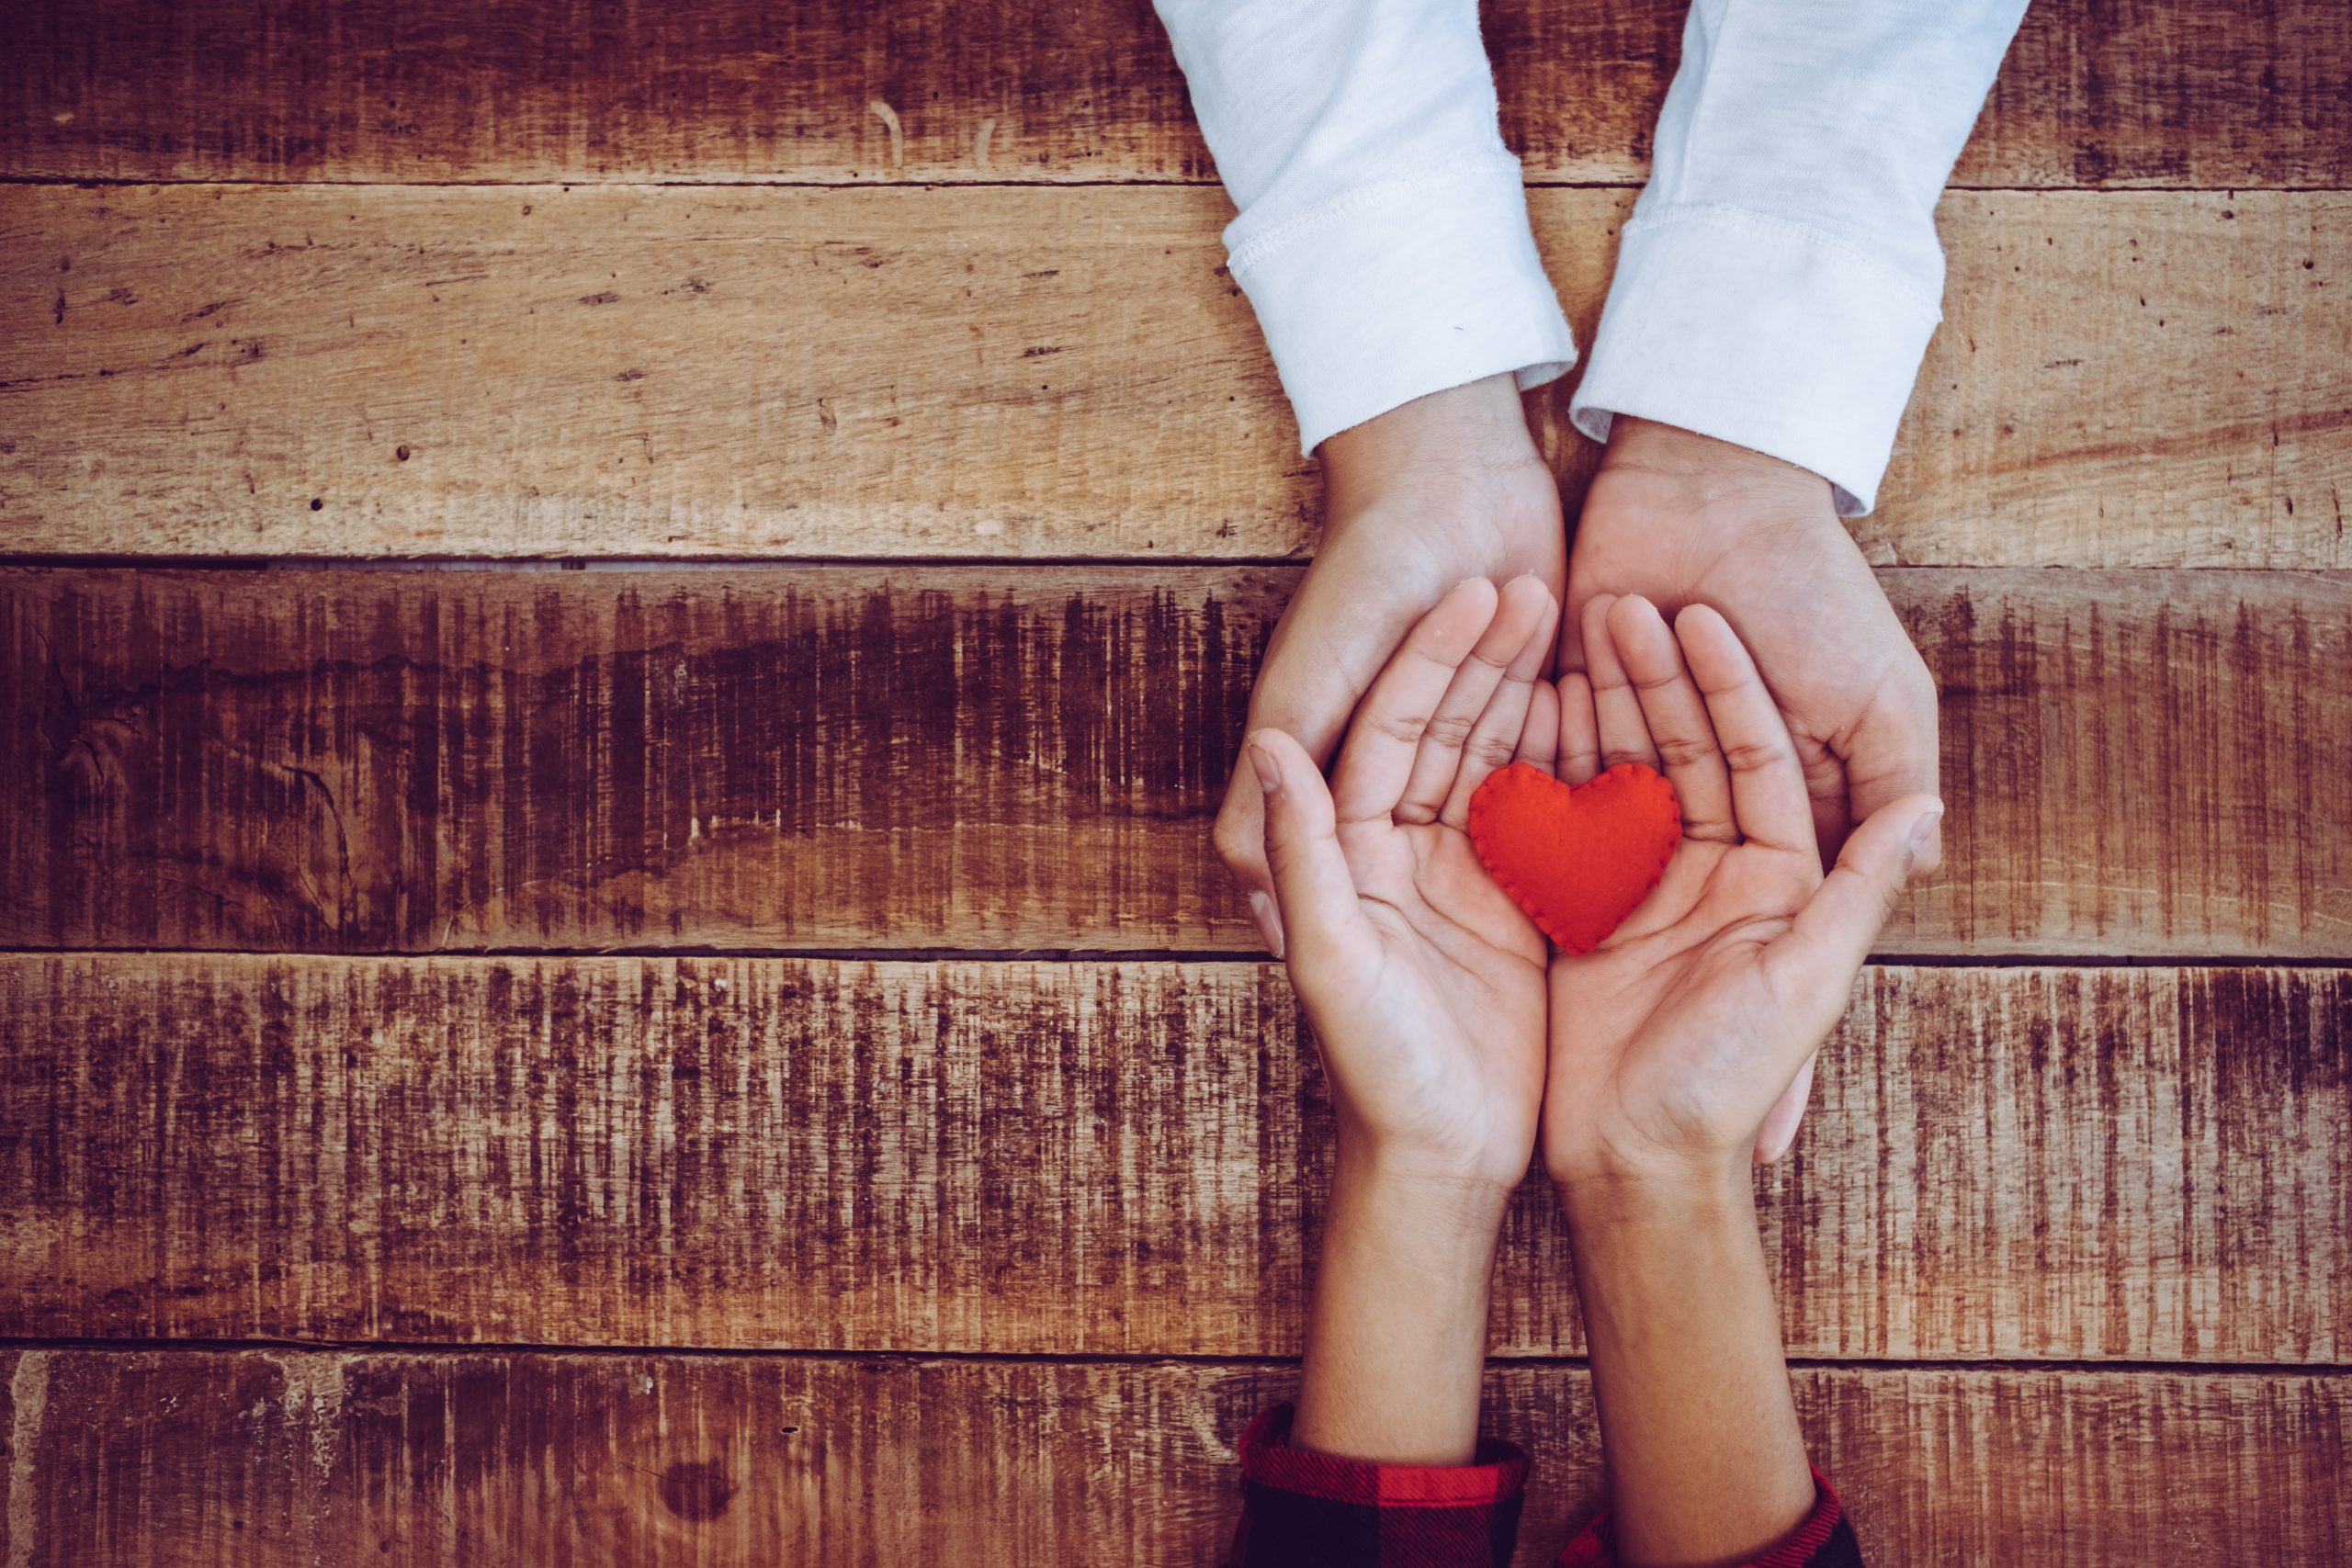 Two pairs of hands holding a red heart together, showing vulnerability.